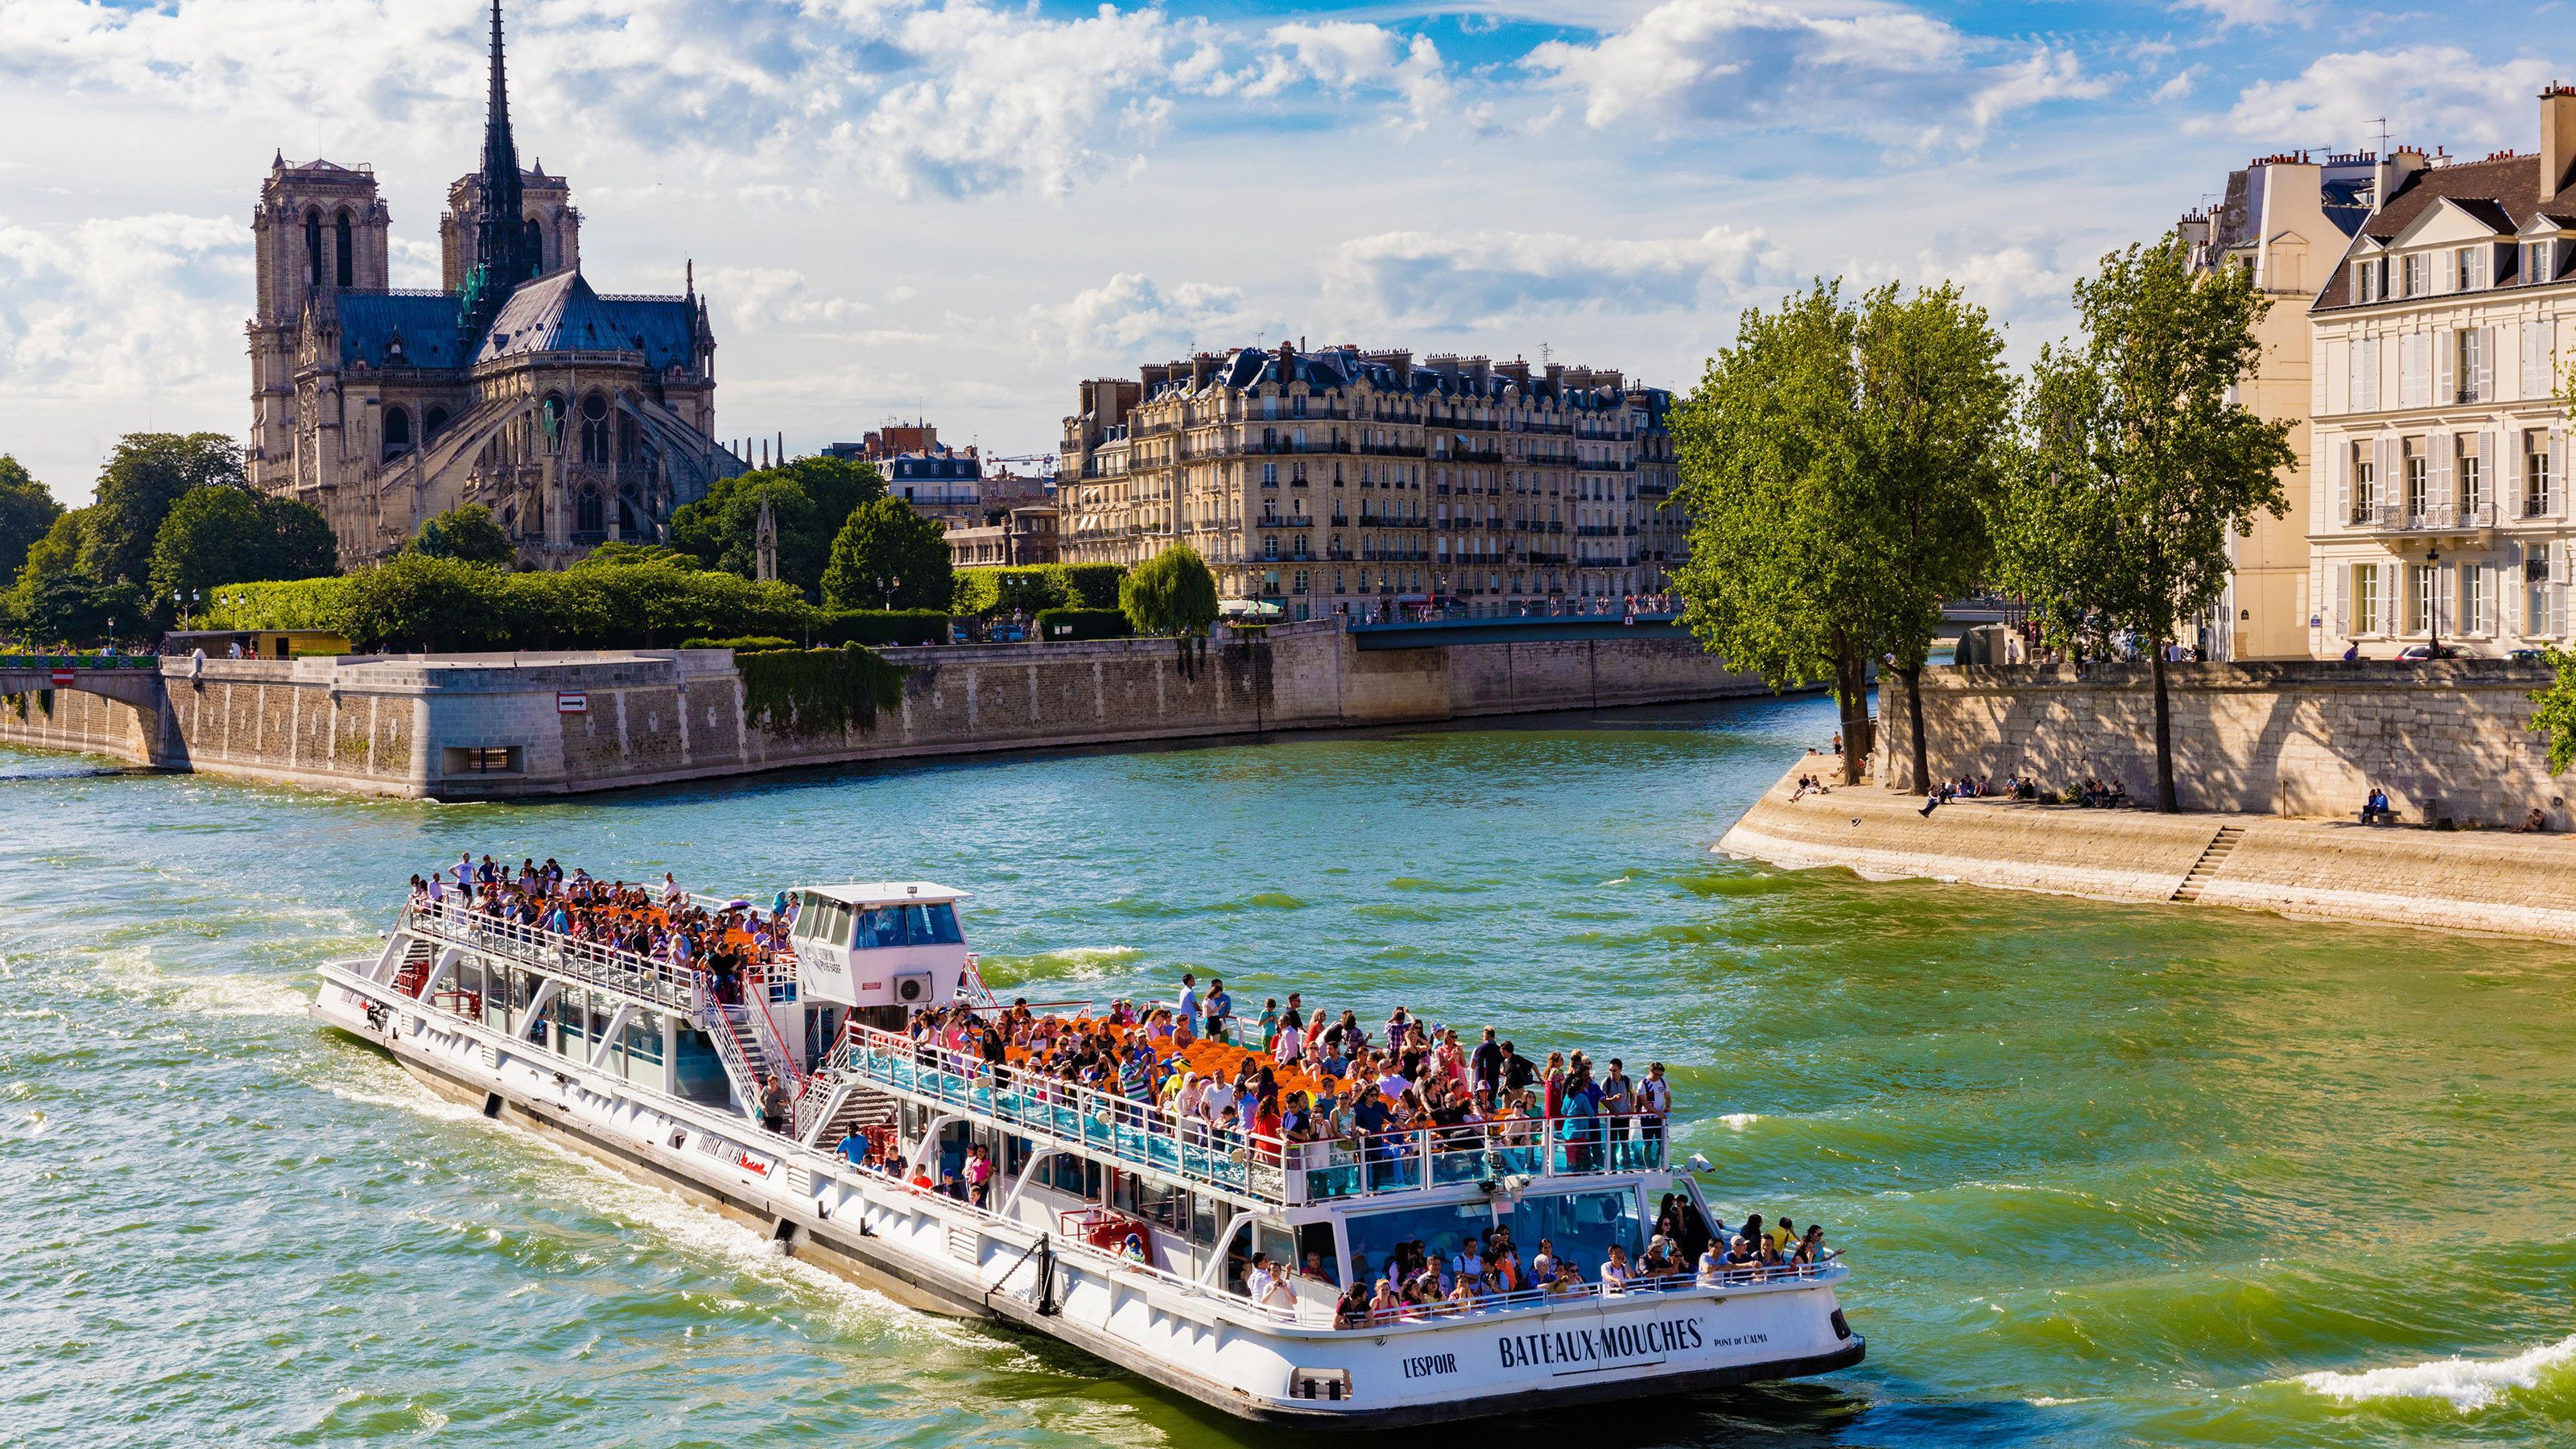 bateaux parisiens seine river sightseeing cruise with commentary